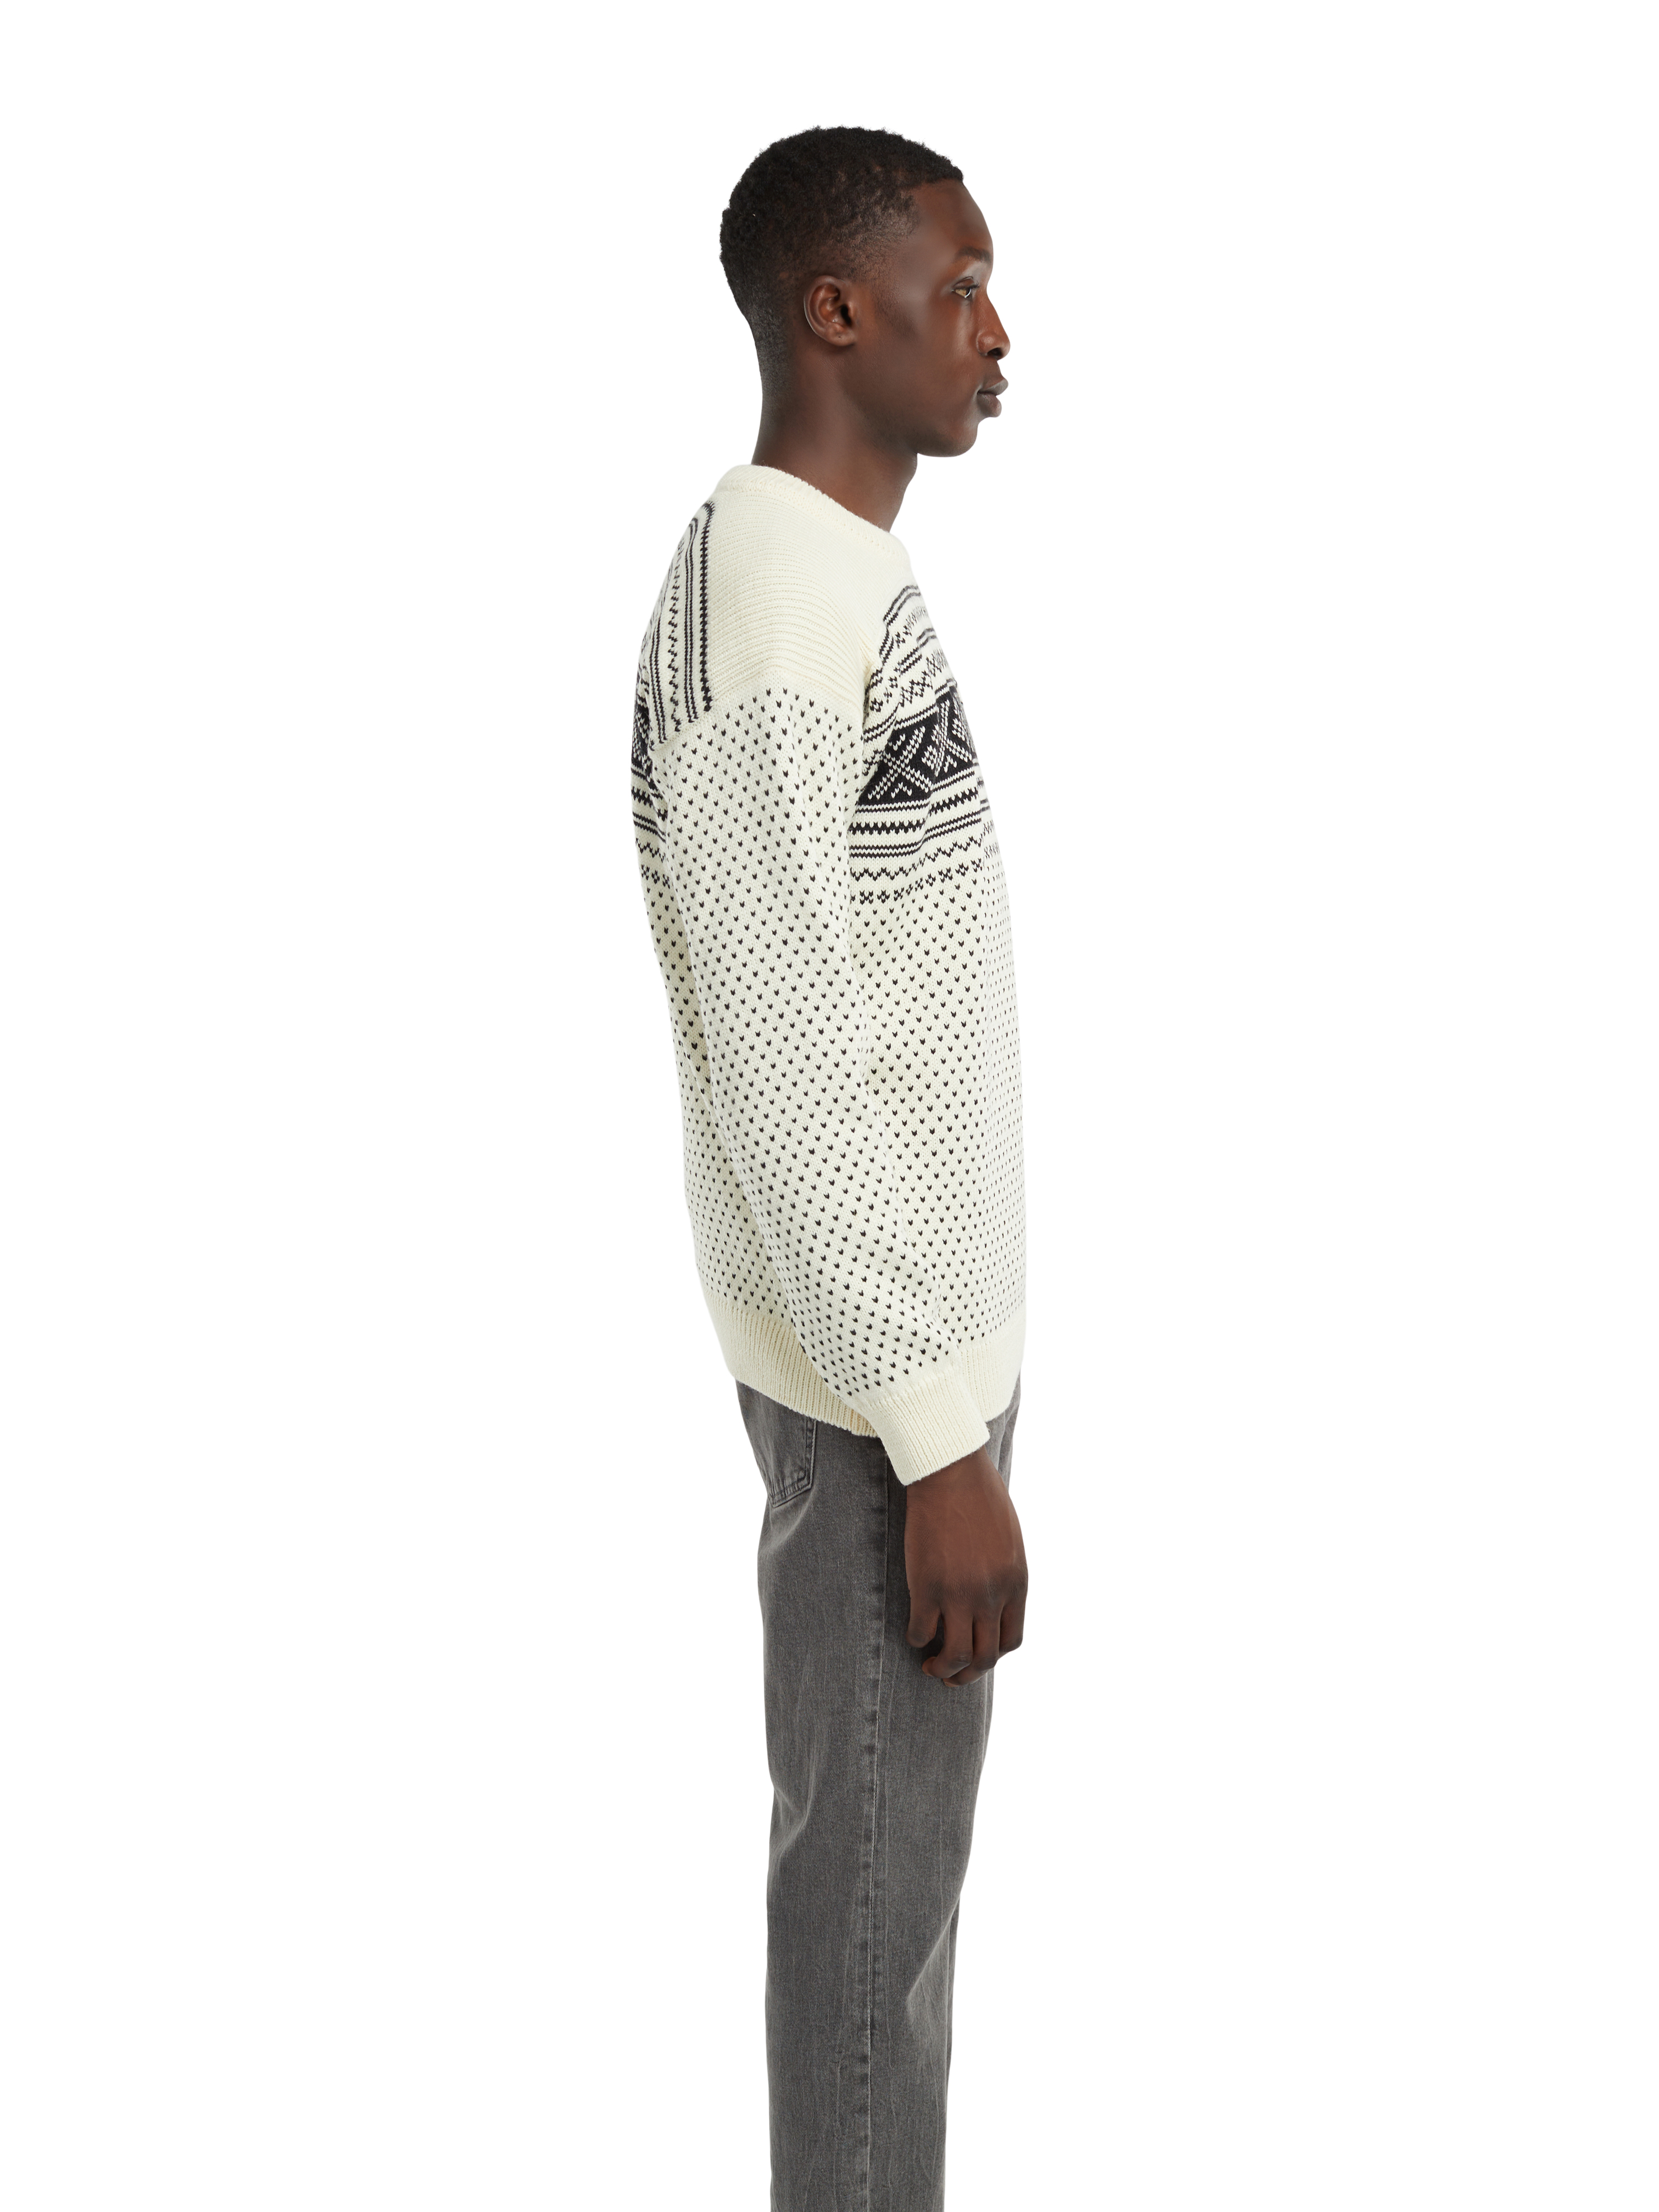 Valløy sweater - Men - Offwhite/Black - Dale of Norway - Dale of